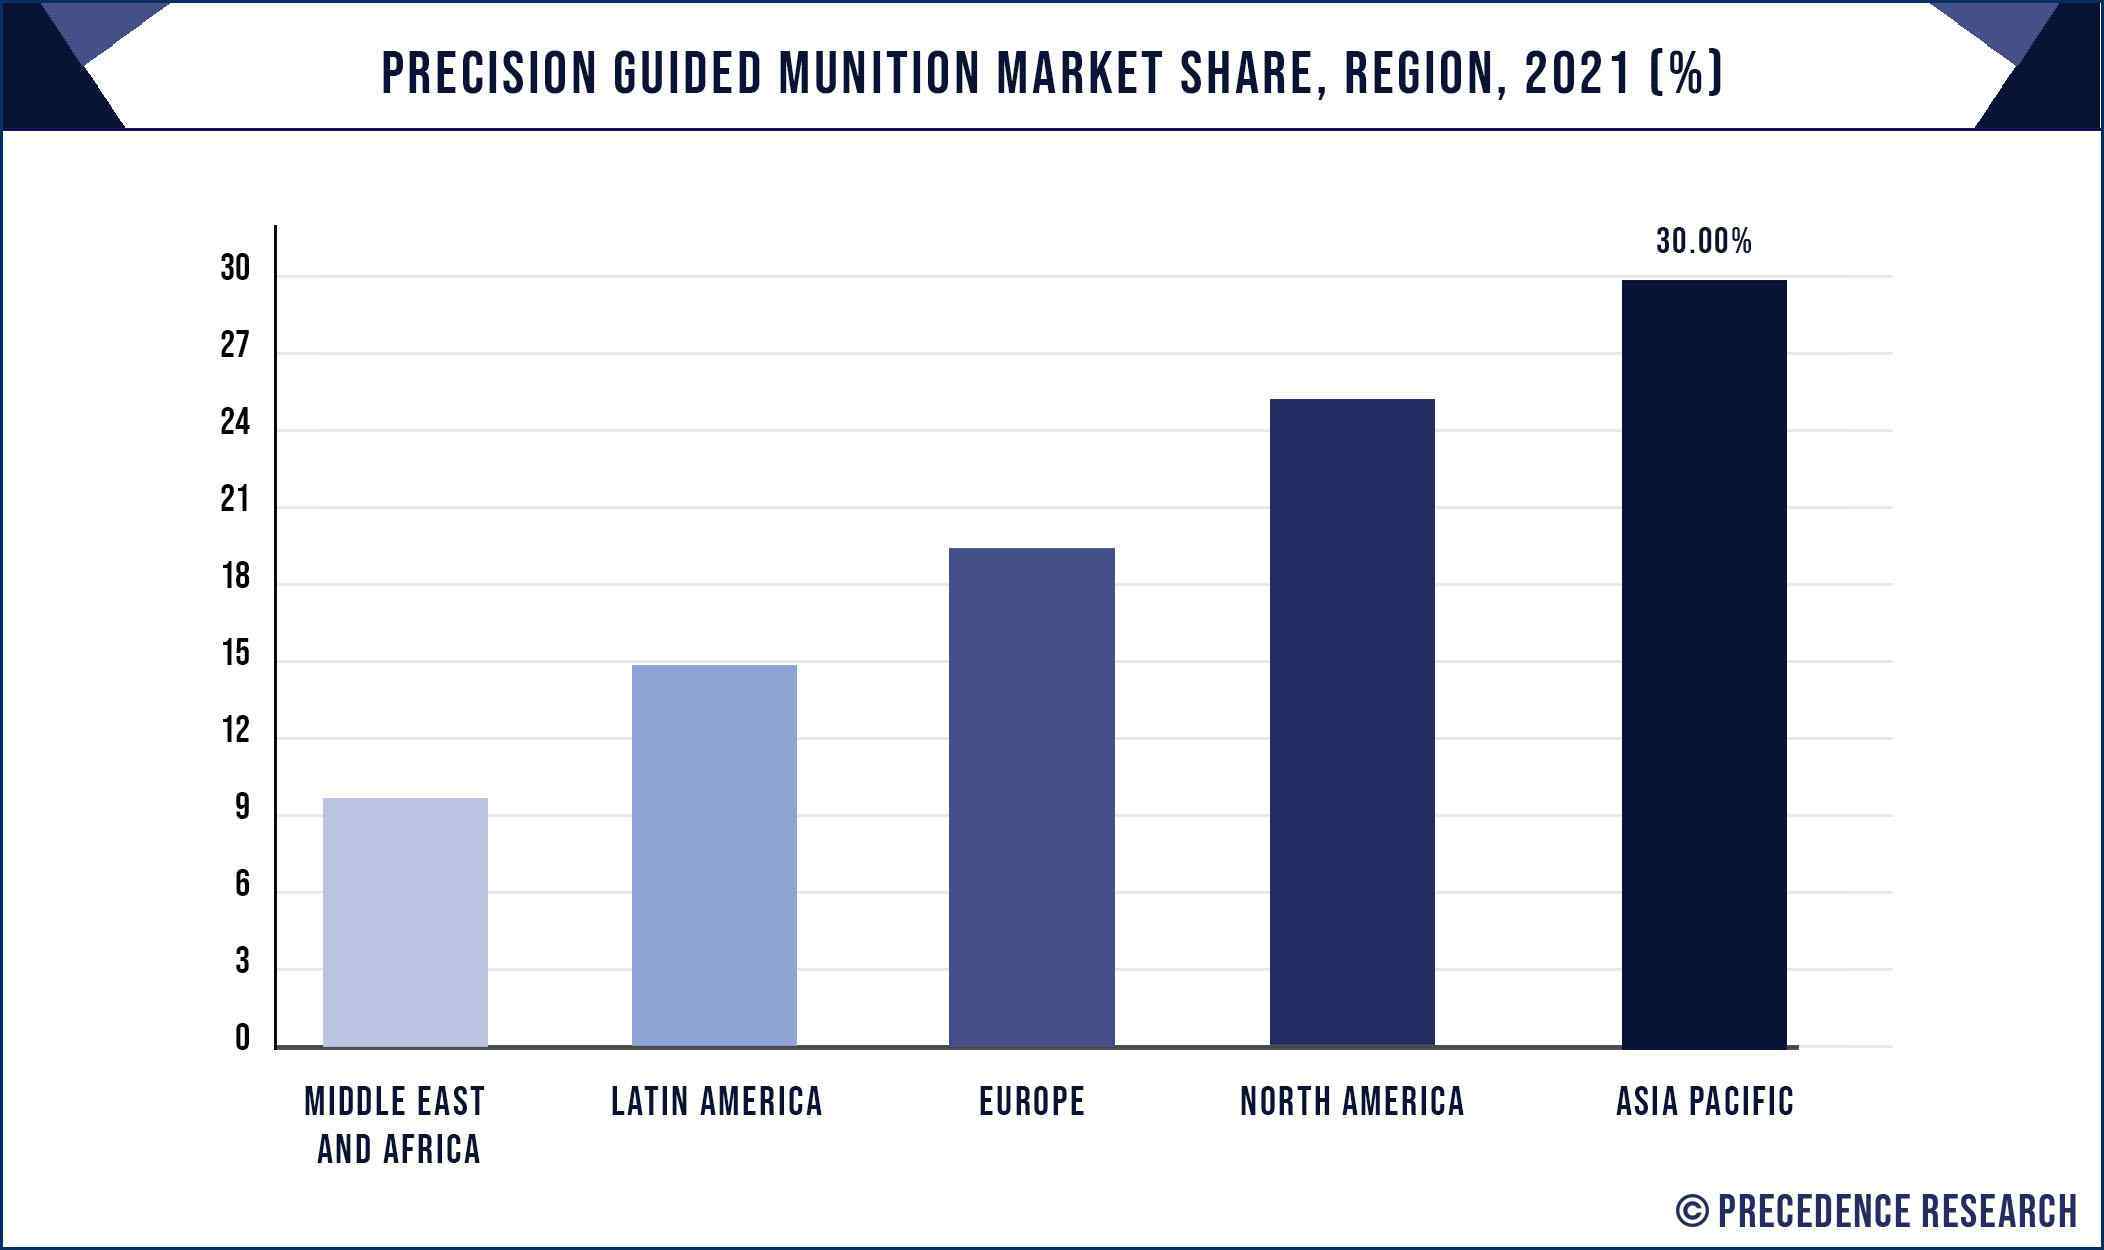 Precision Guided Munition Market Share, By Region, 2021 (%)